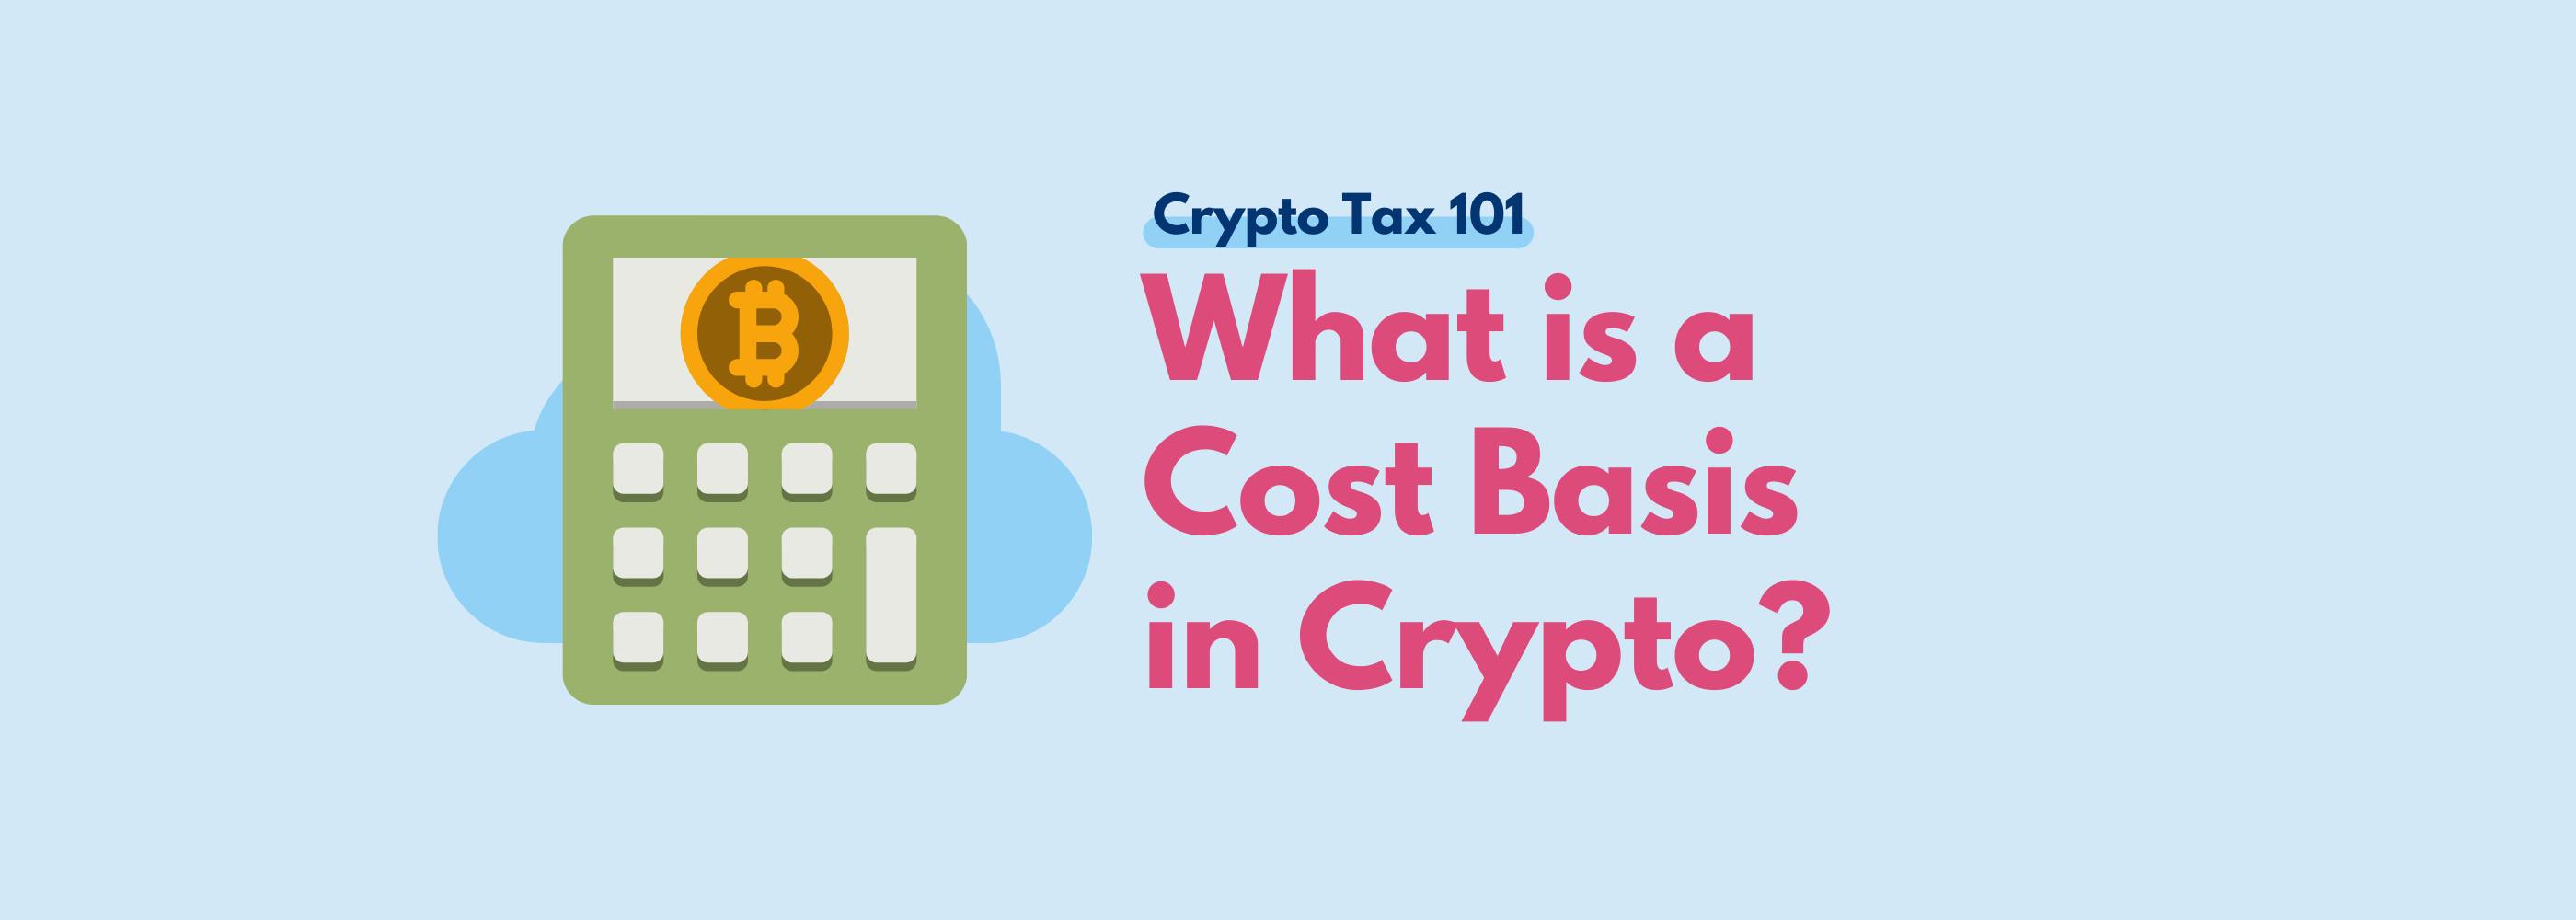 Cost basis and cost basis methods explained